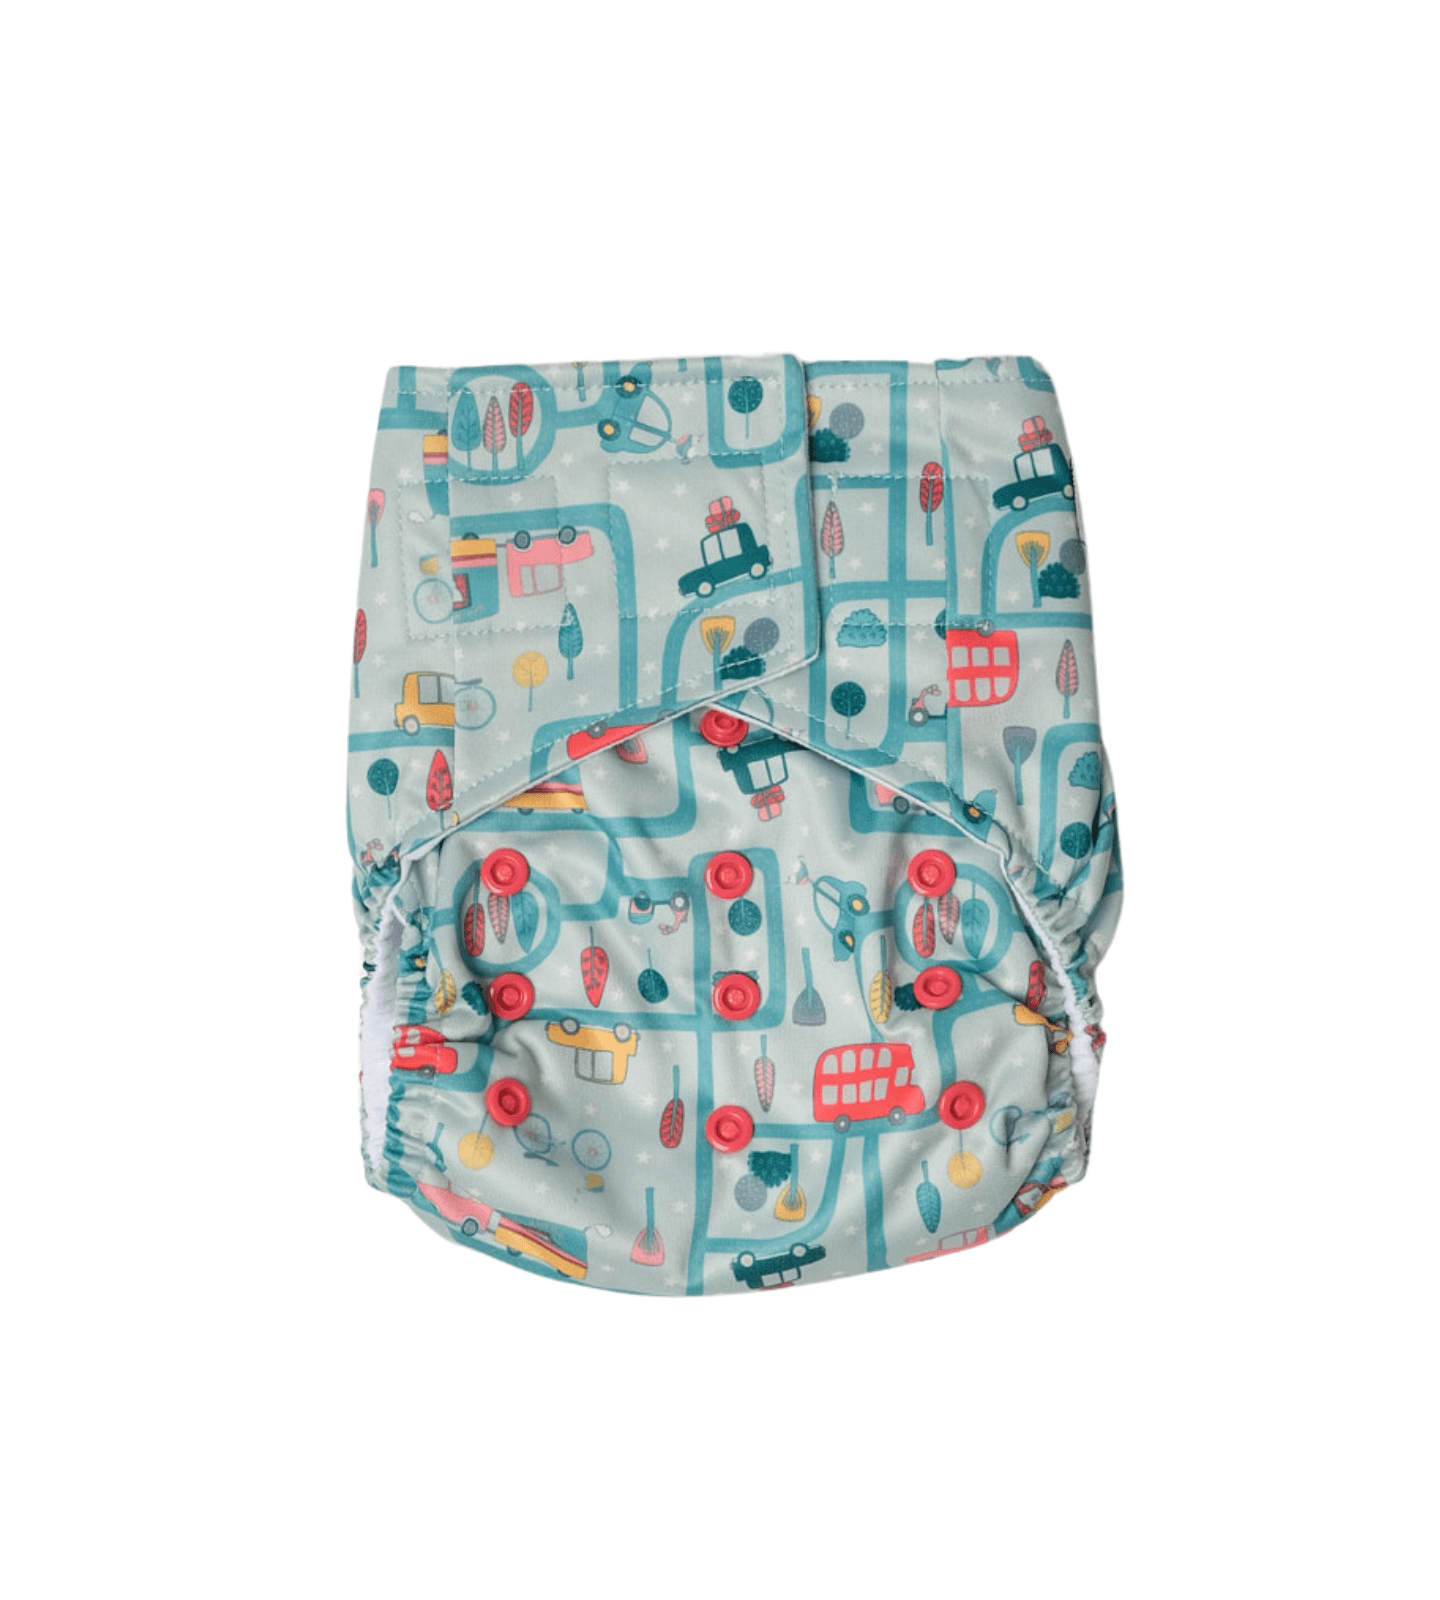 Snazzi Pants All in One Cloth Nappy - Brolly Sheets NZ